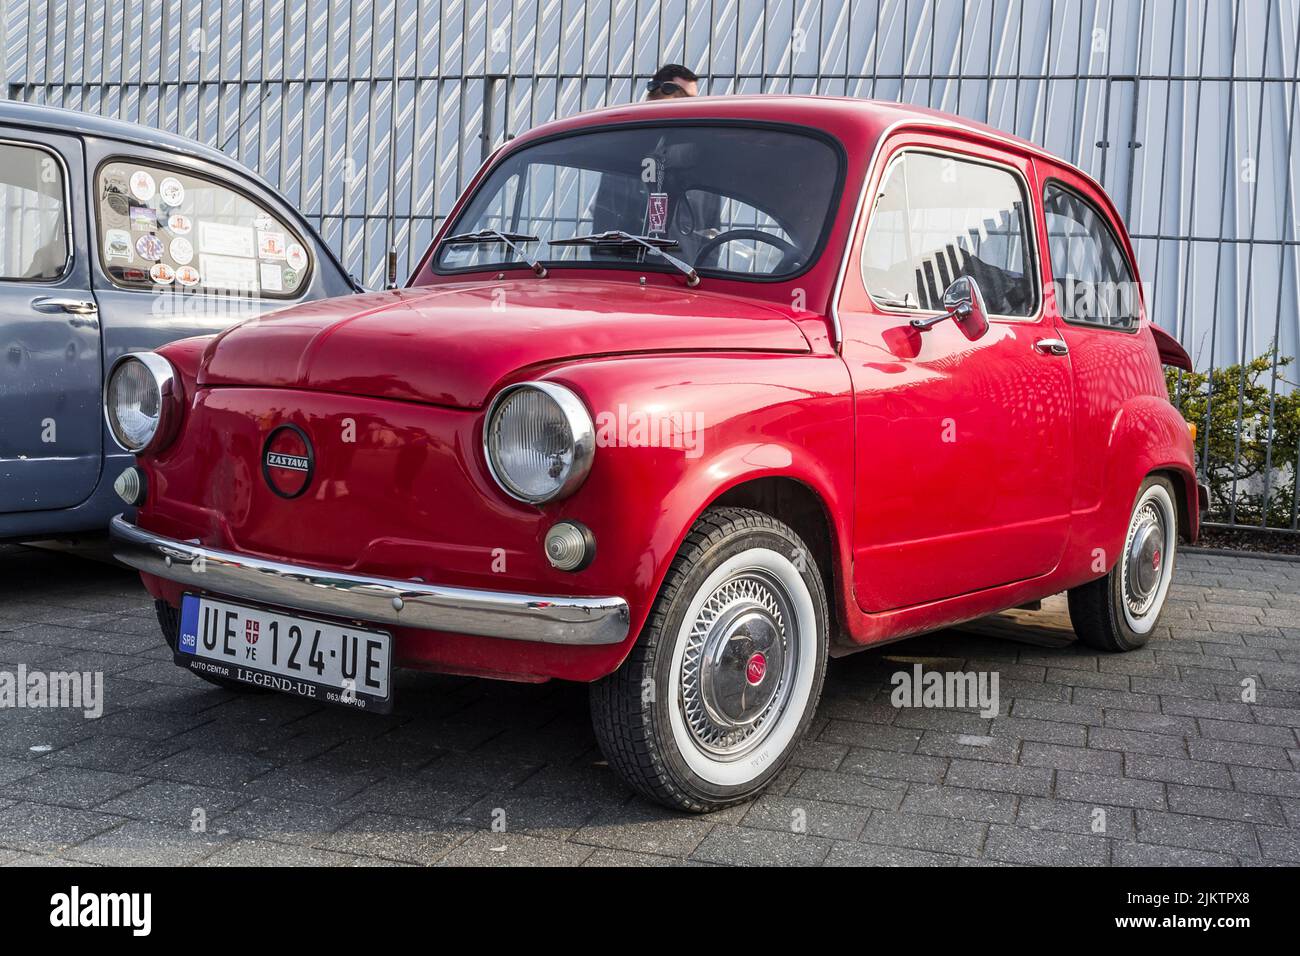 A red Zastava 750 classical vintage city car on the classical old car exhibition in Zadar, Croatia Stock Photo